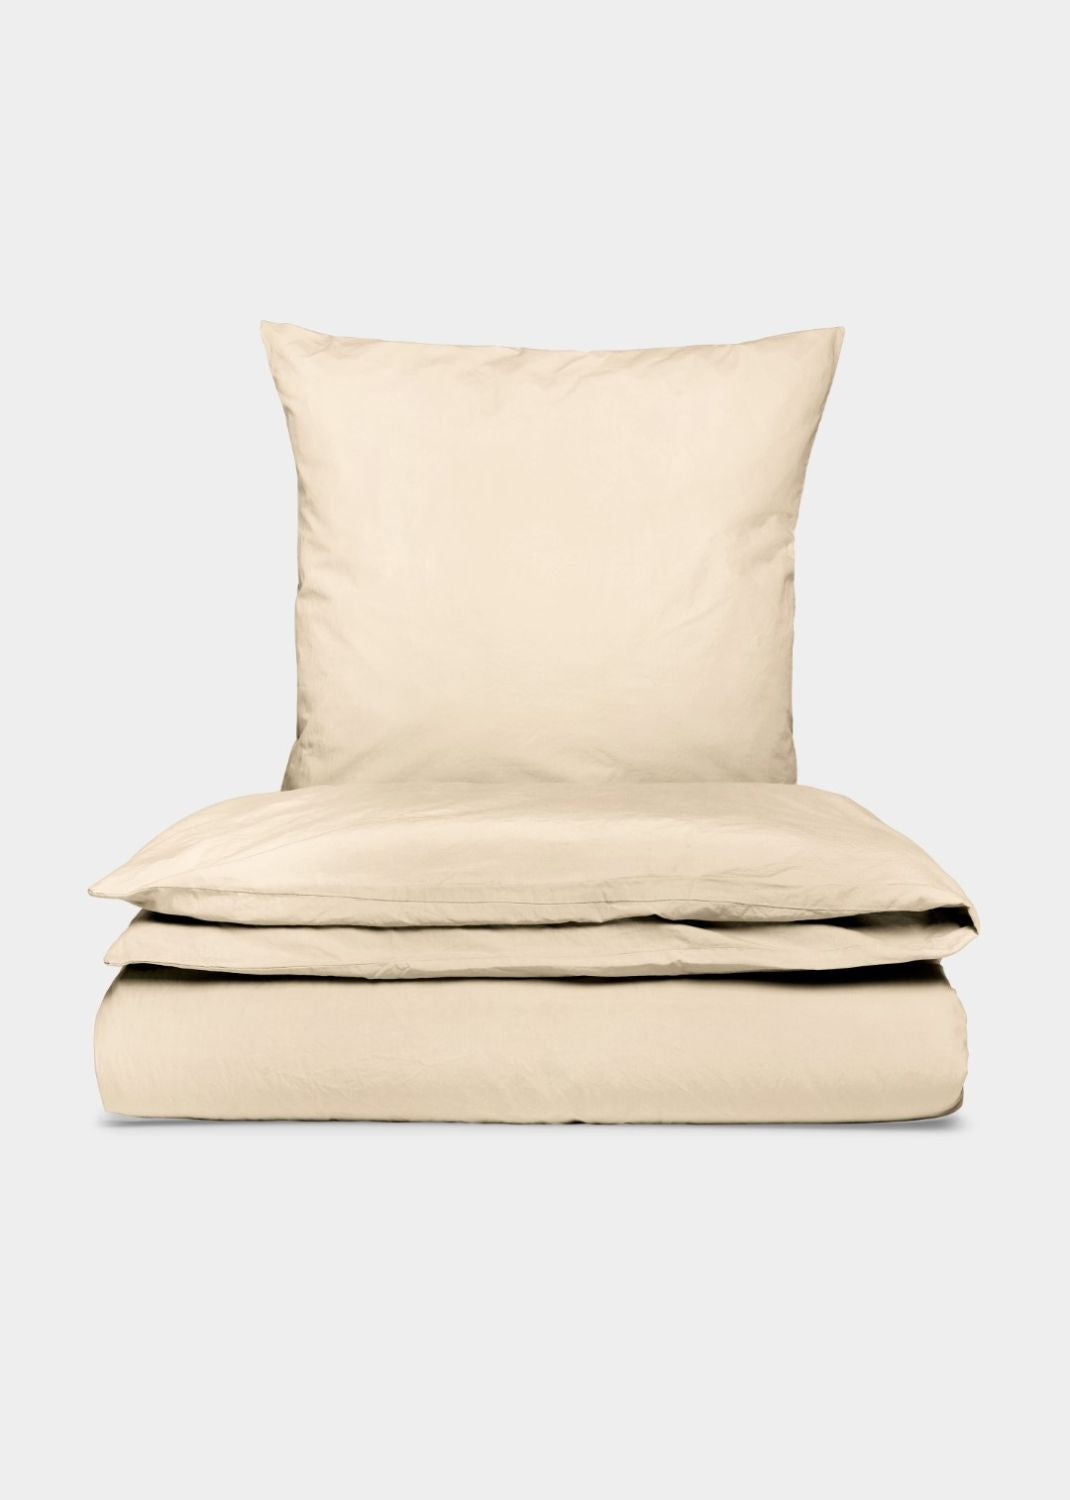 Sekan Studio Cotton Percale Bed Set - bege